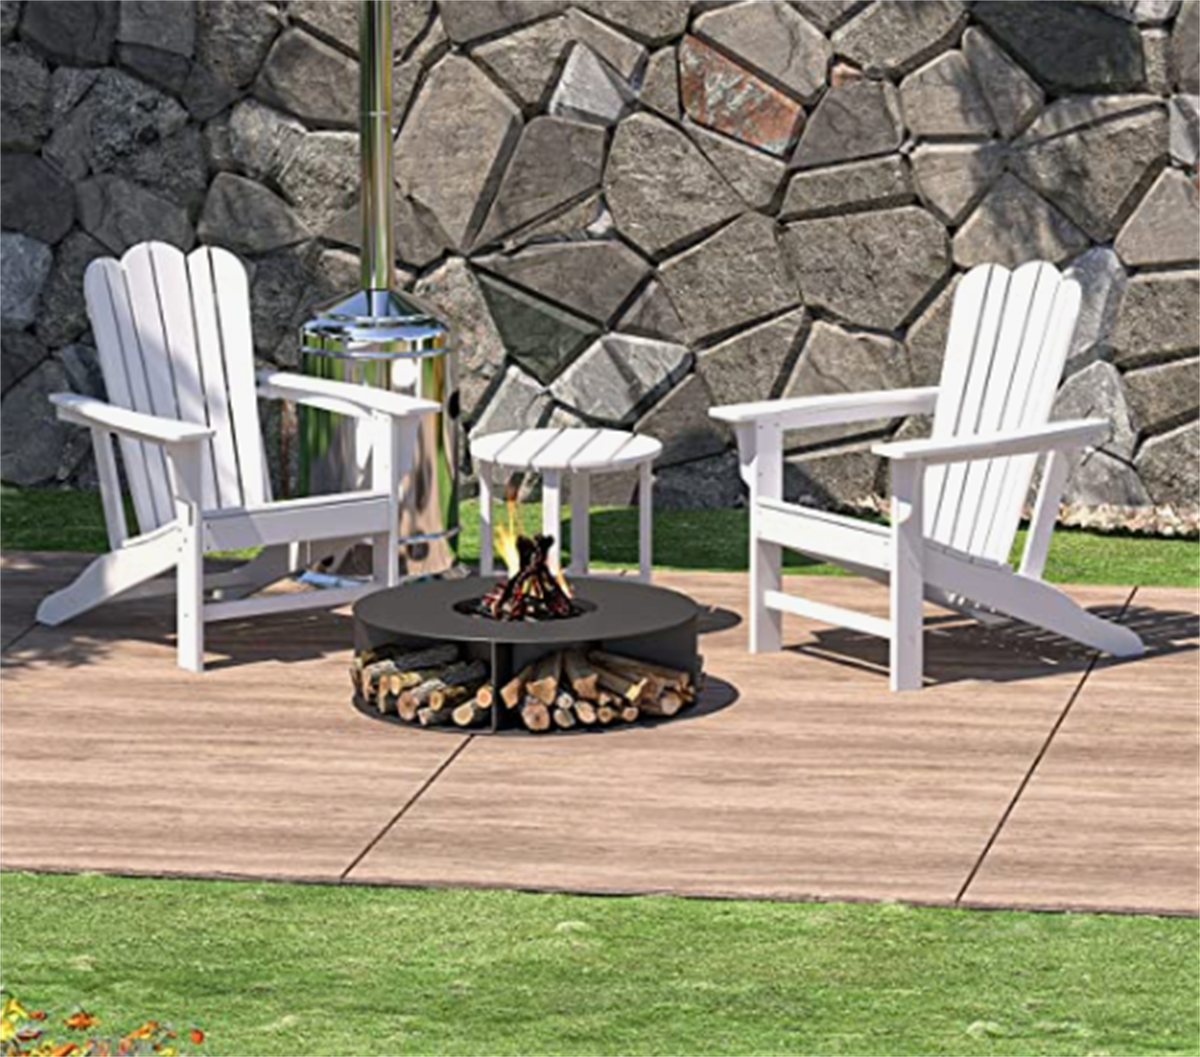 Adirondack Chair Set with 2 Plastic Adirondack Chairs & 1 Outdoor Side Table, Outdoor Adirondack Chair Patio Lounge Chairs with Large Seat & Tall Backrest for Patio Deck, Weather Resistant, White - image 1 of 7